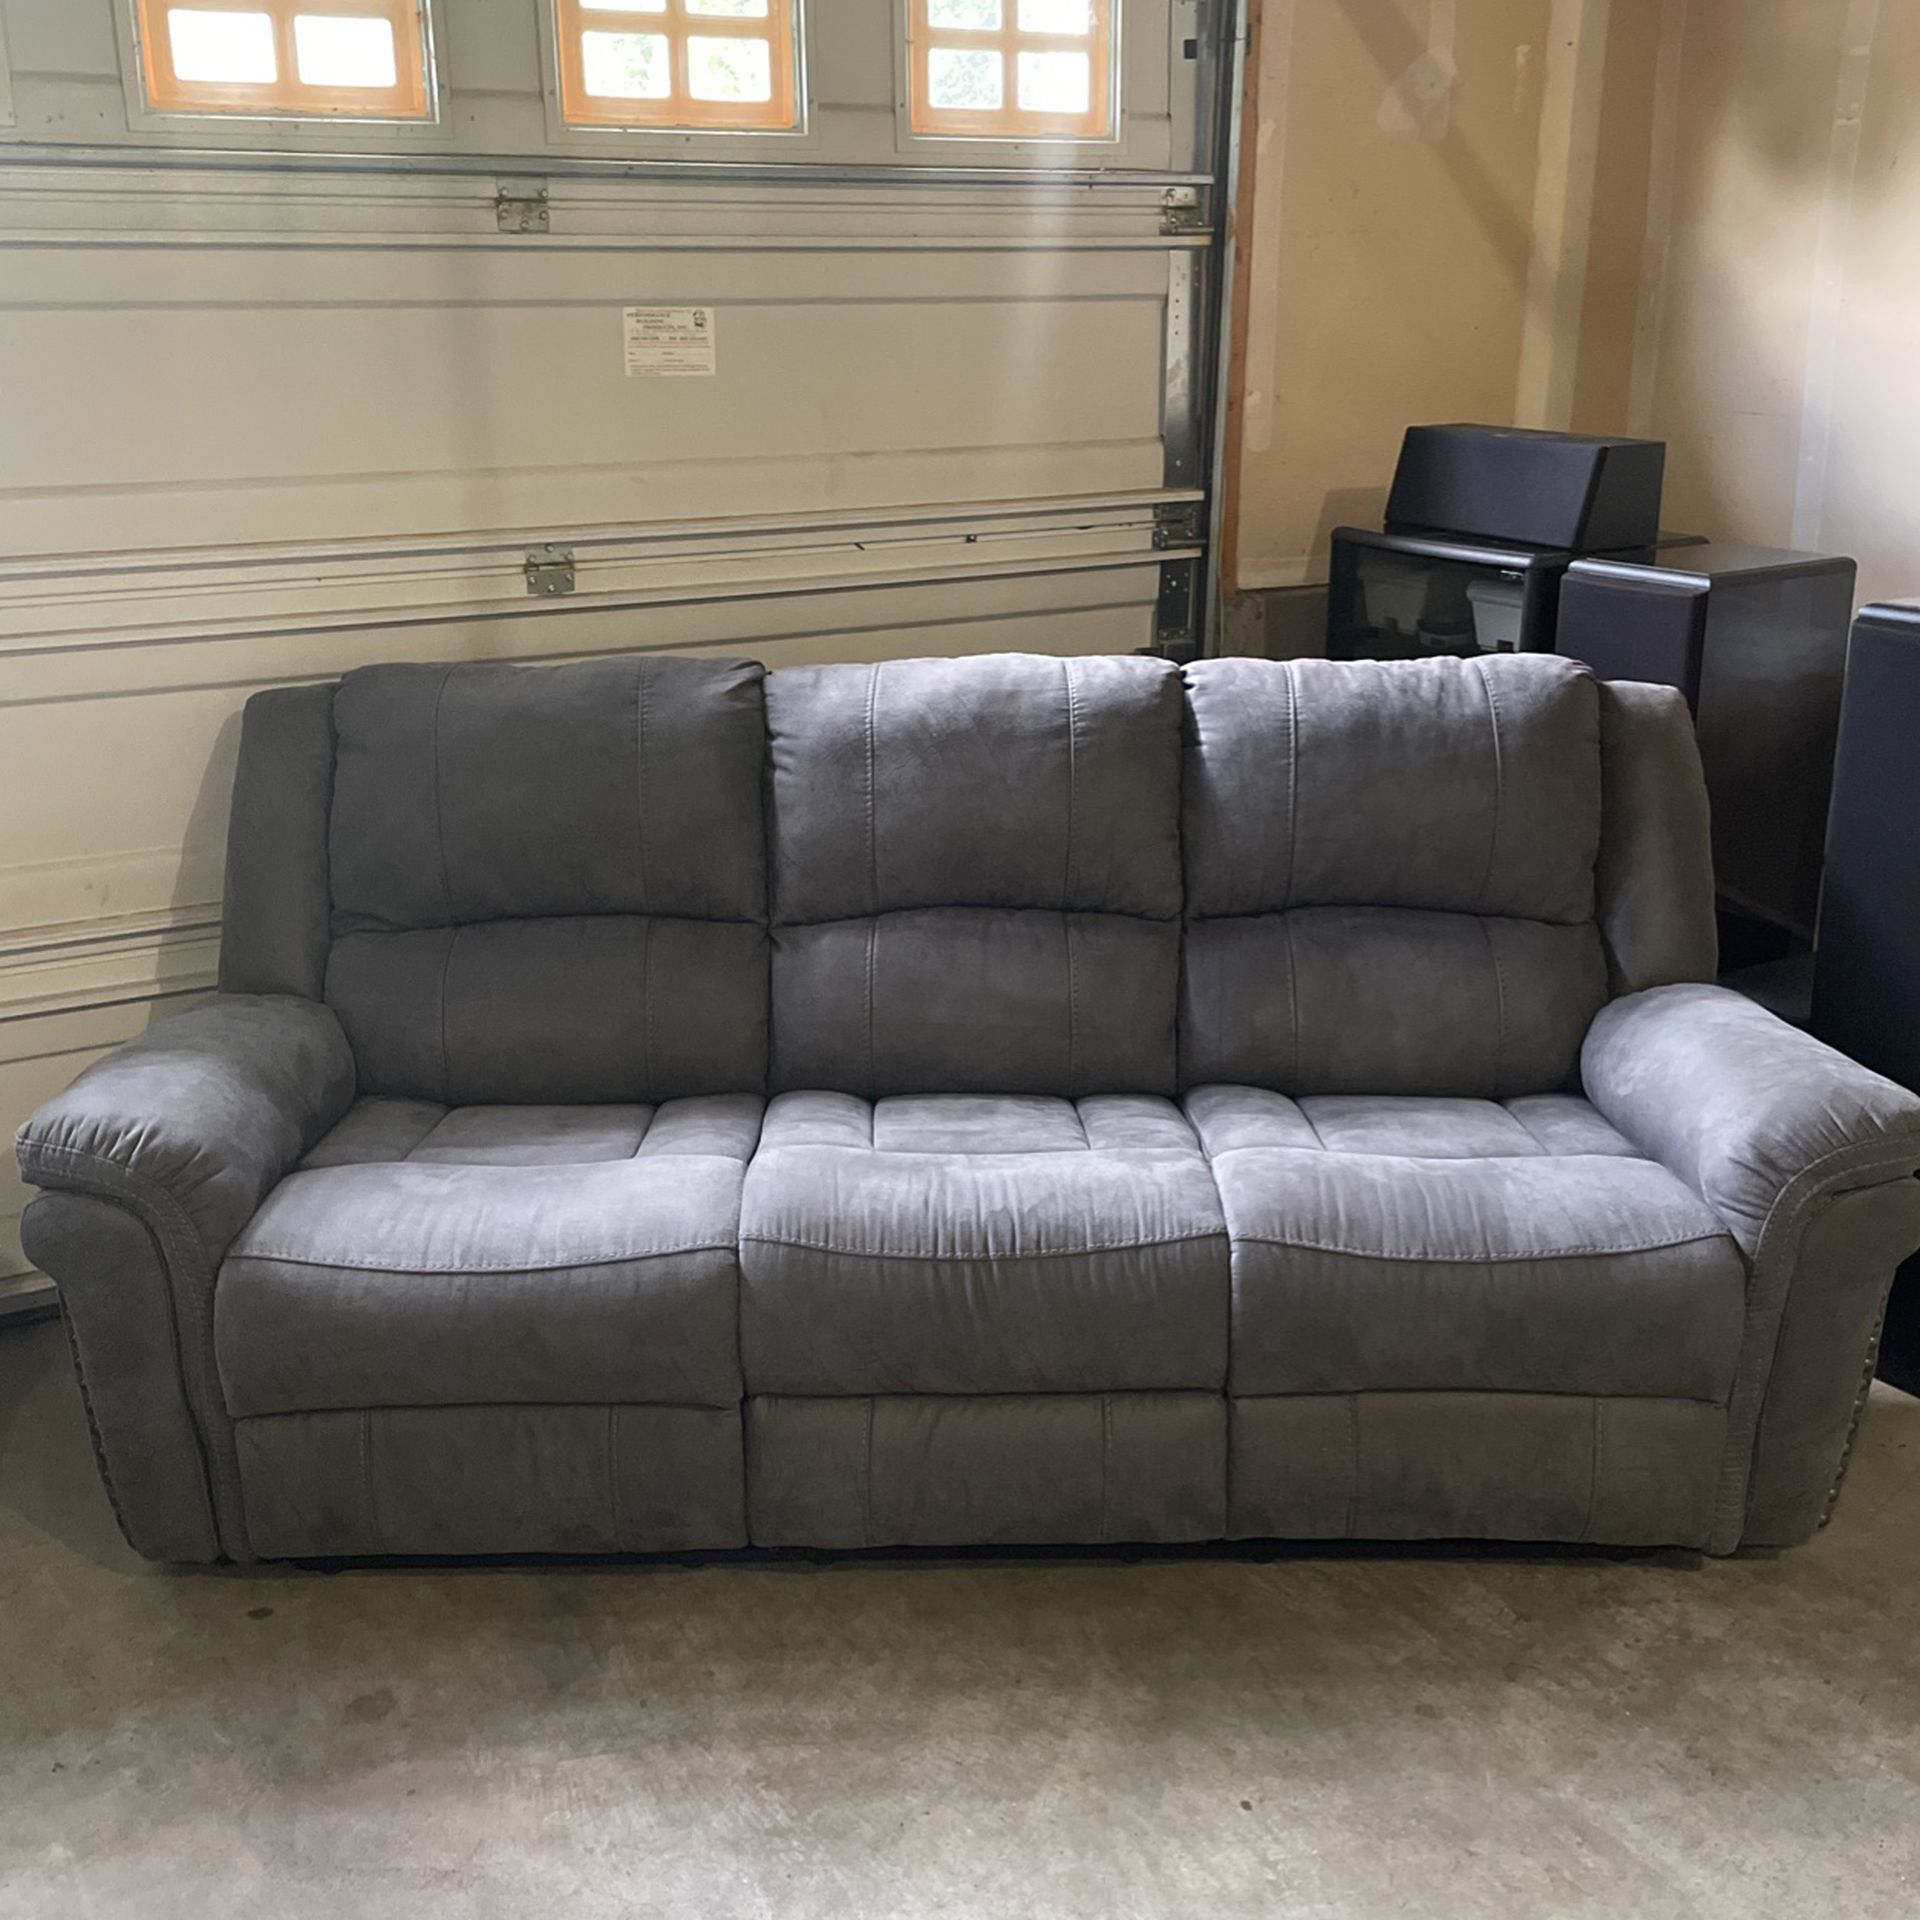 Grey Colored Couch with Reclining Chairs